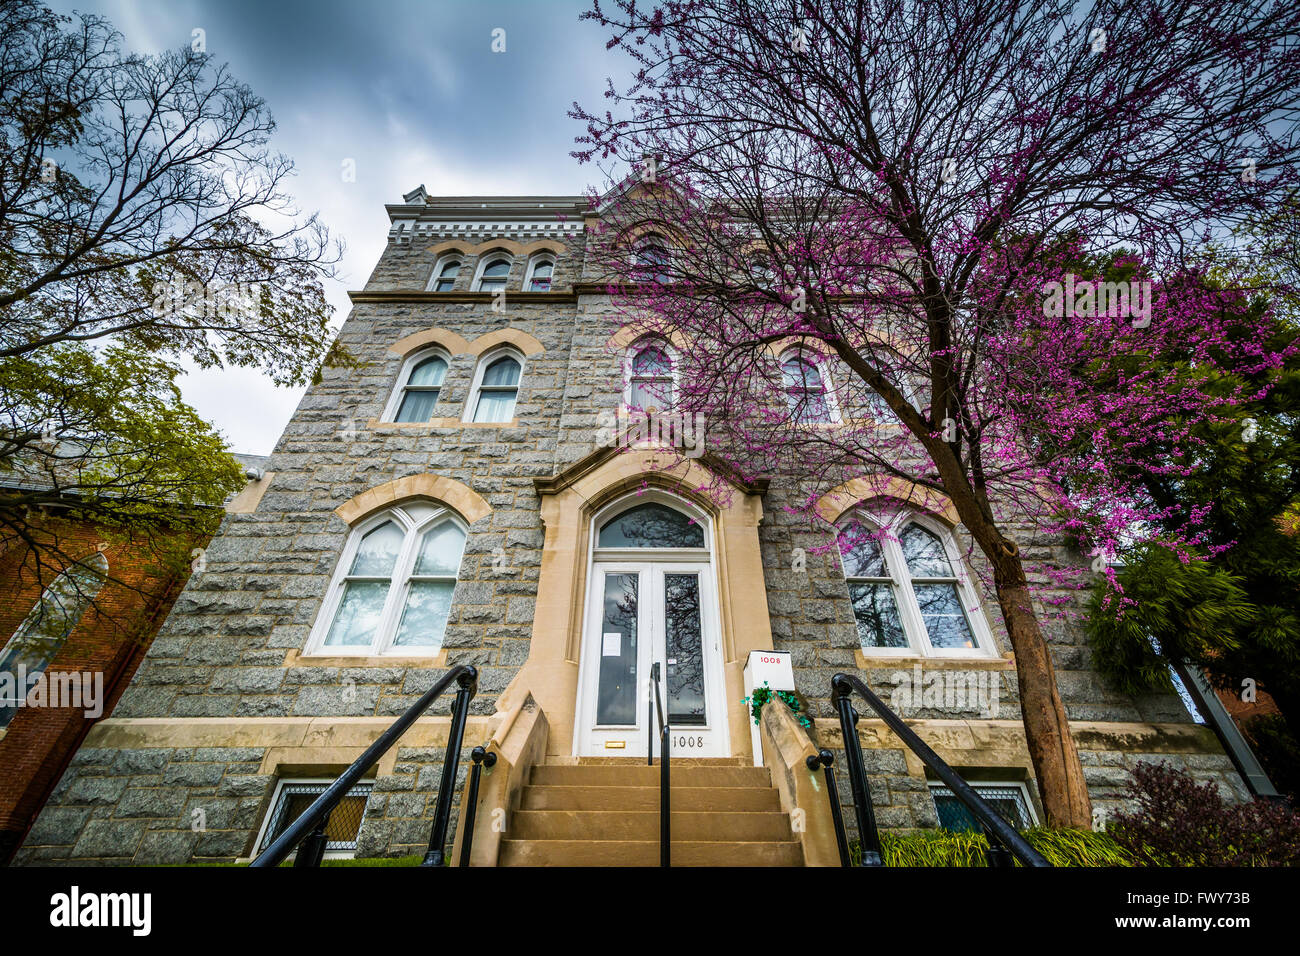 Old stone building and trees in Hampden, Baltimore, Maryland. Stock Photo